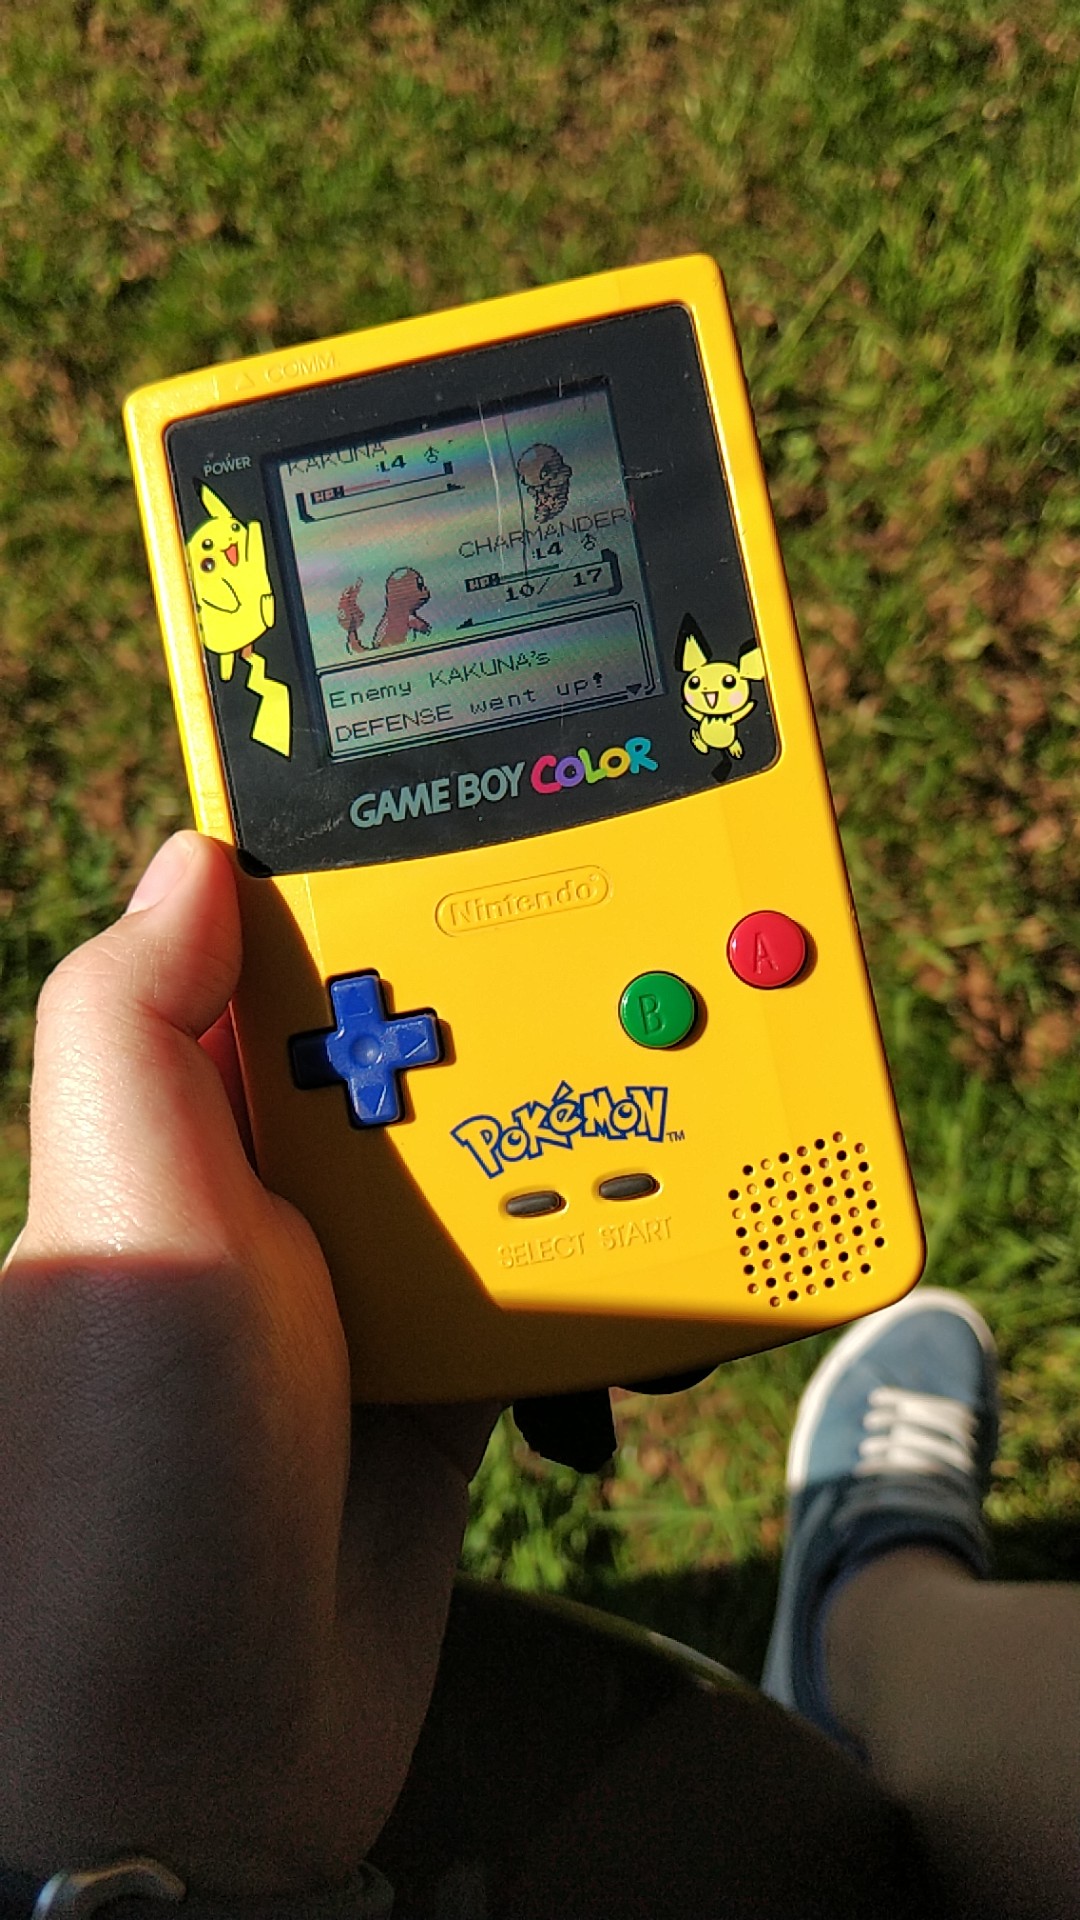 Cool Dmg Palette To Play Pokemon In